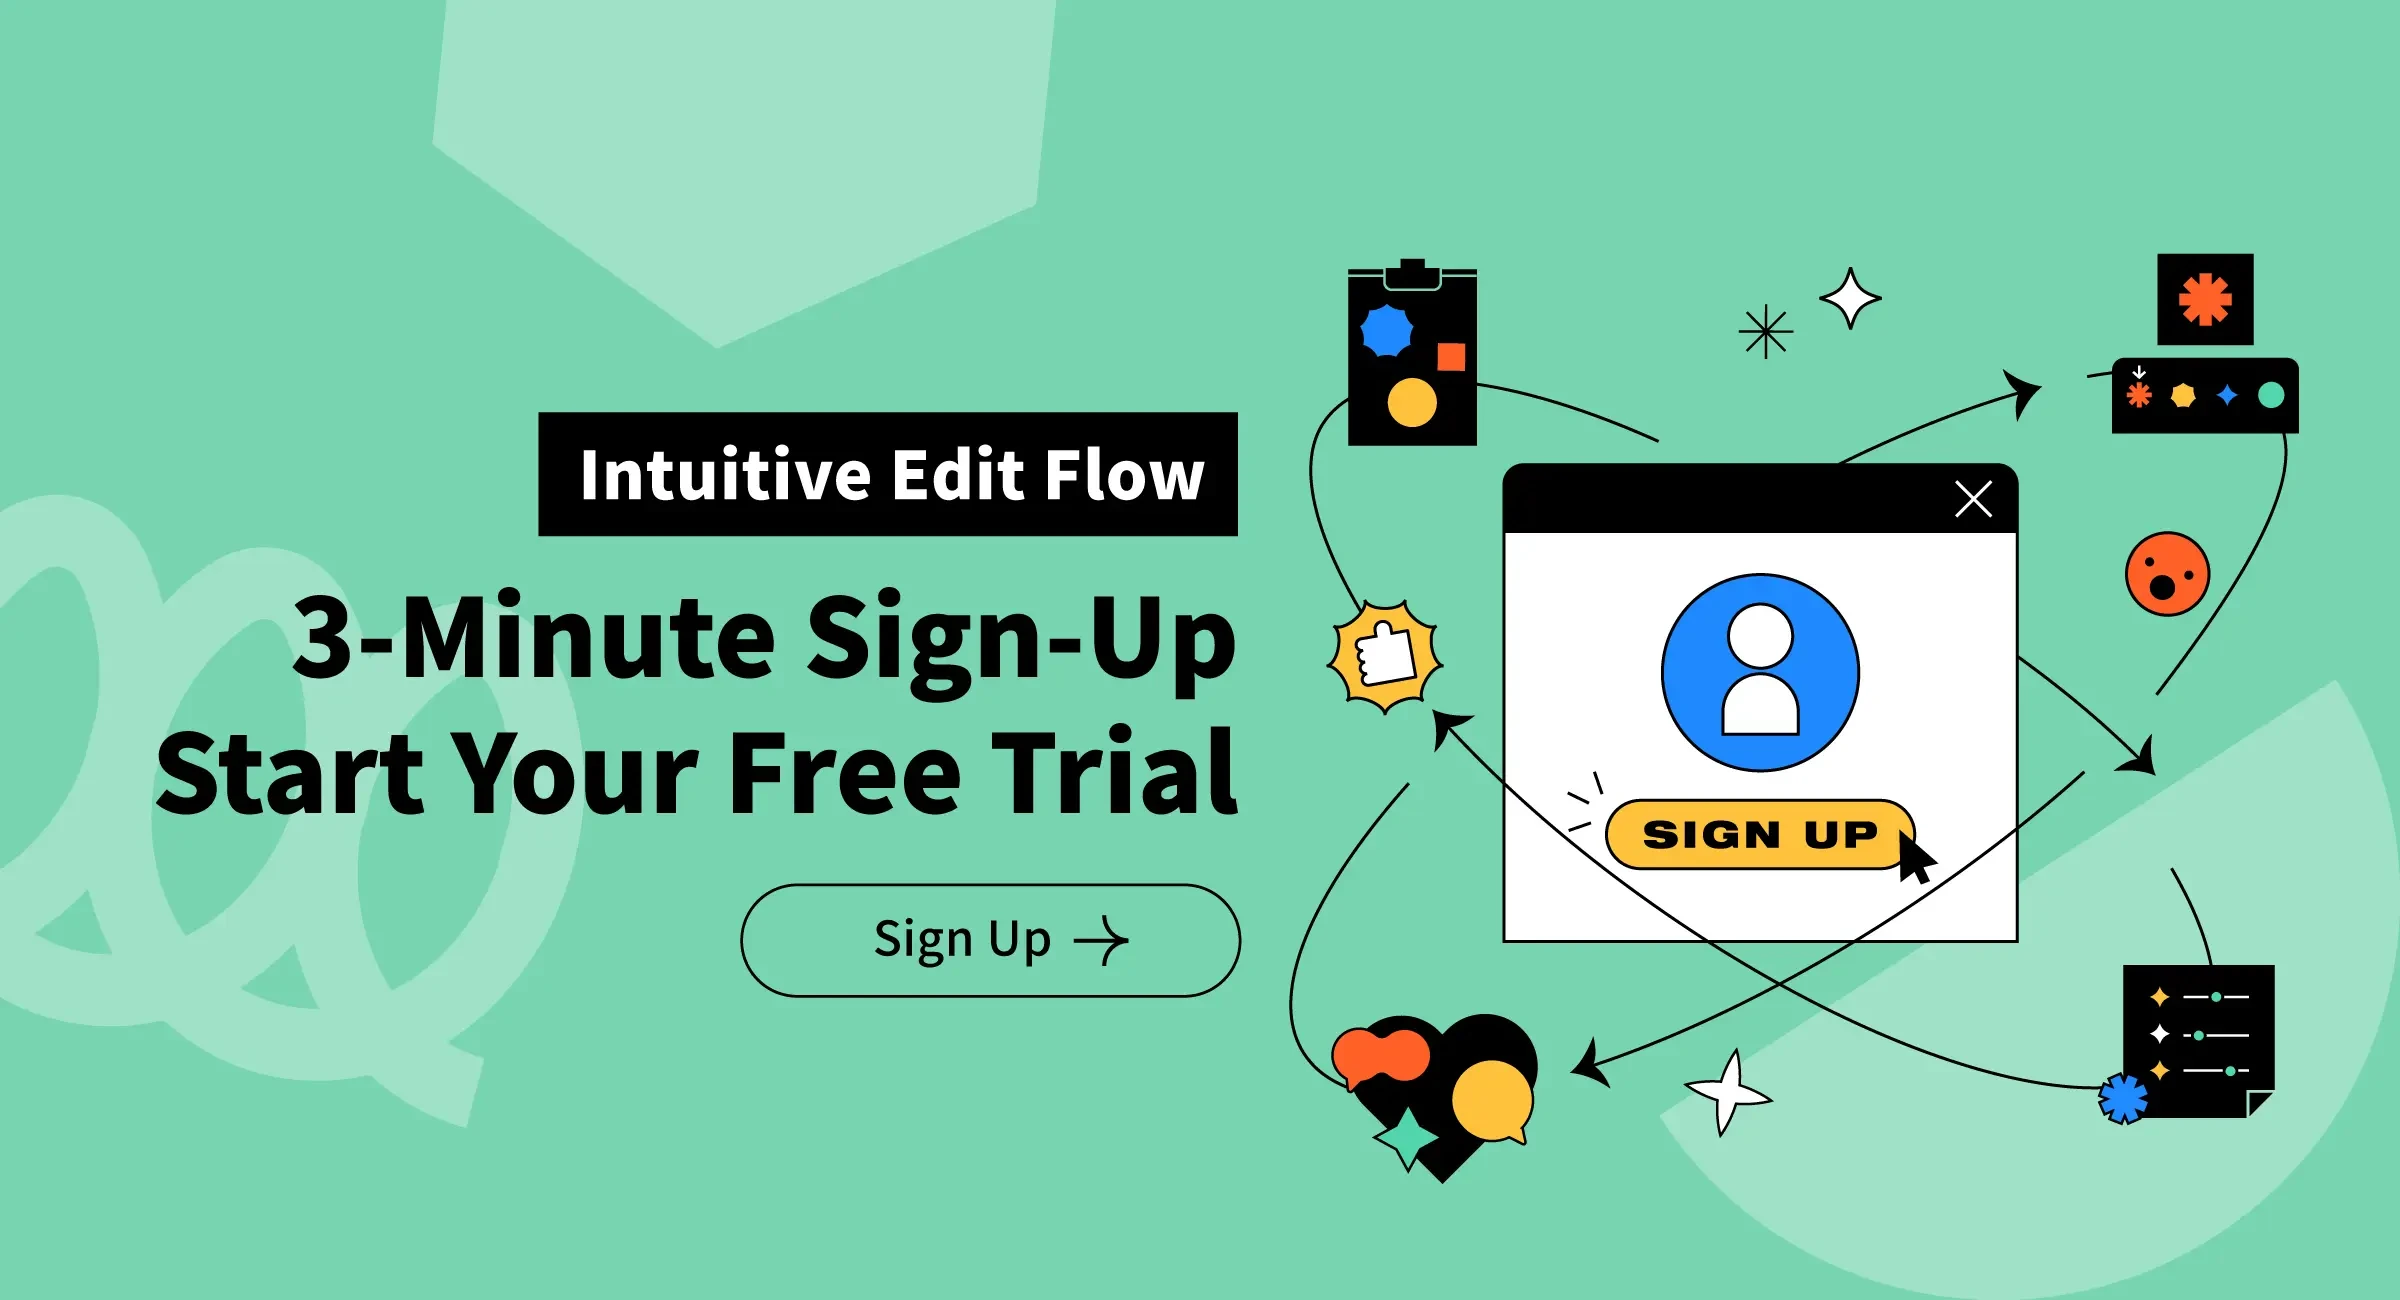 Intuitive Edit Flow, 3-Minute Sign-Up, Start Your Free Trial Now